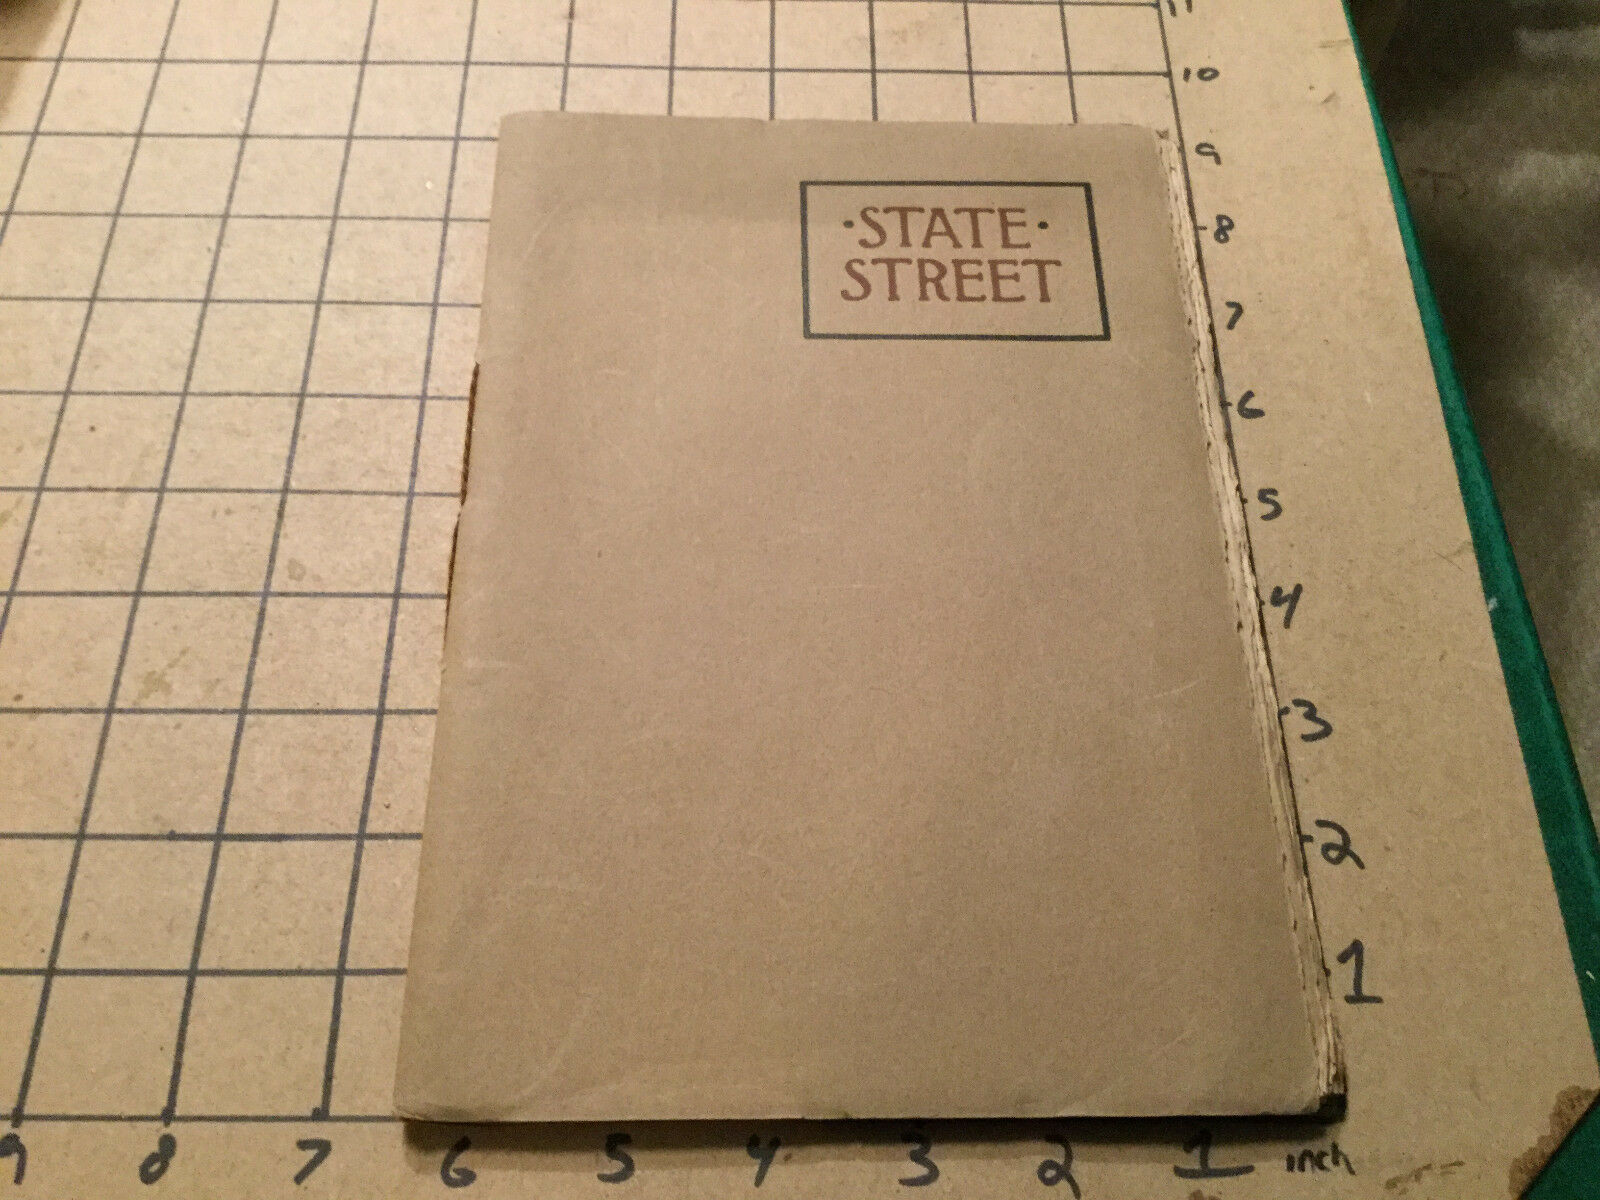 Original Booklet: 1906 State Street A Brief Account Of A Boston Way 42pgs